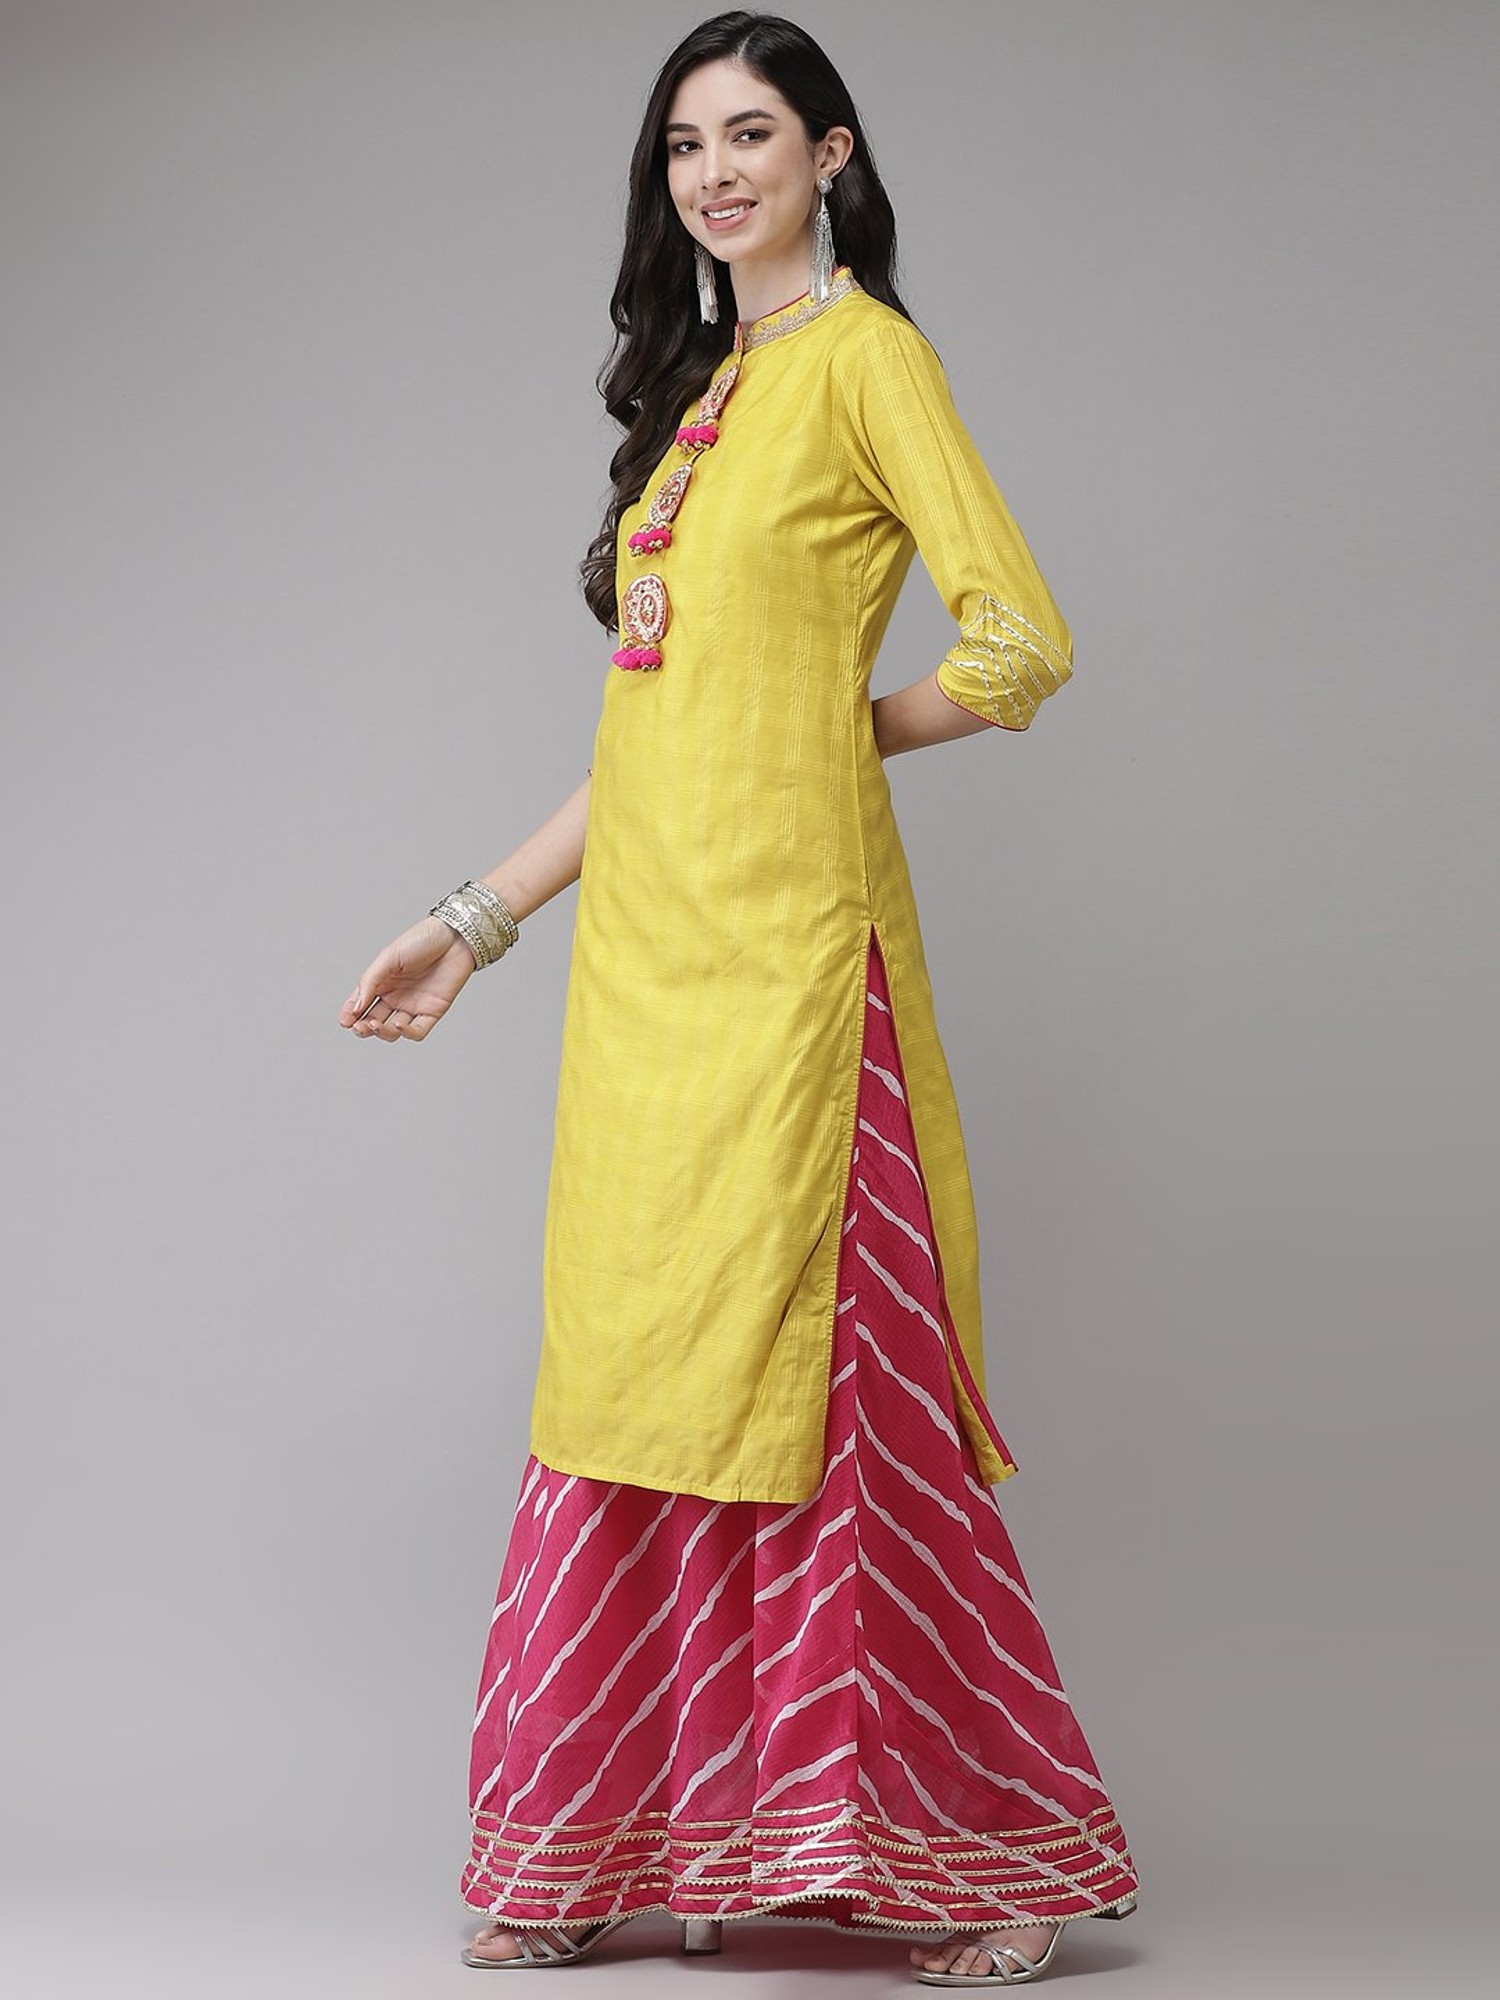 Which colour matches a yellow kurti? - Quora